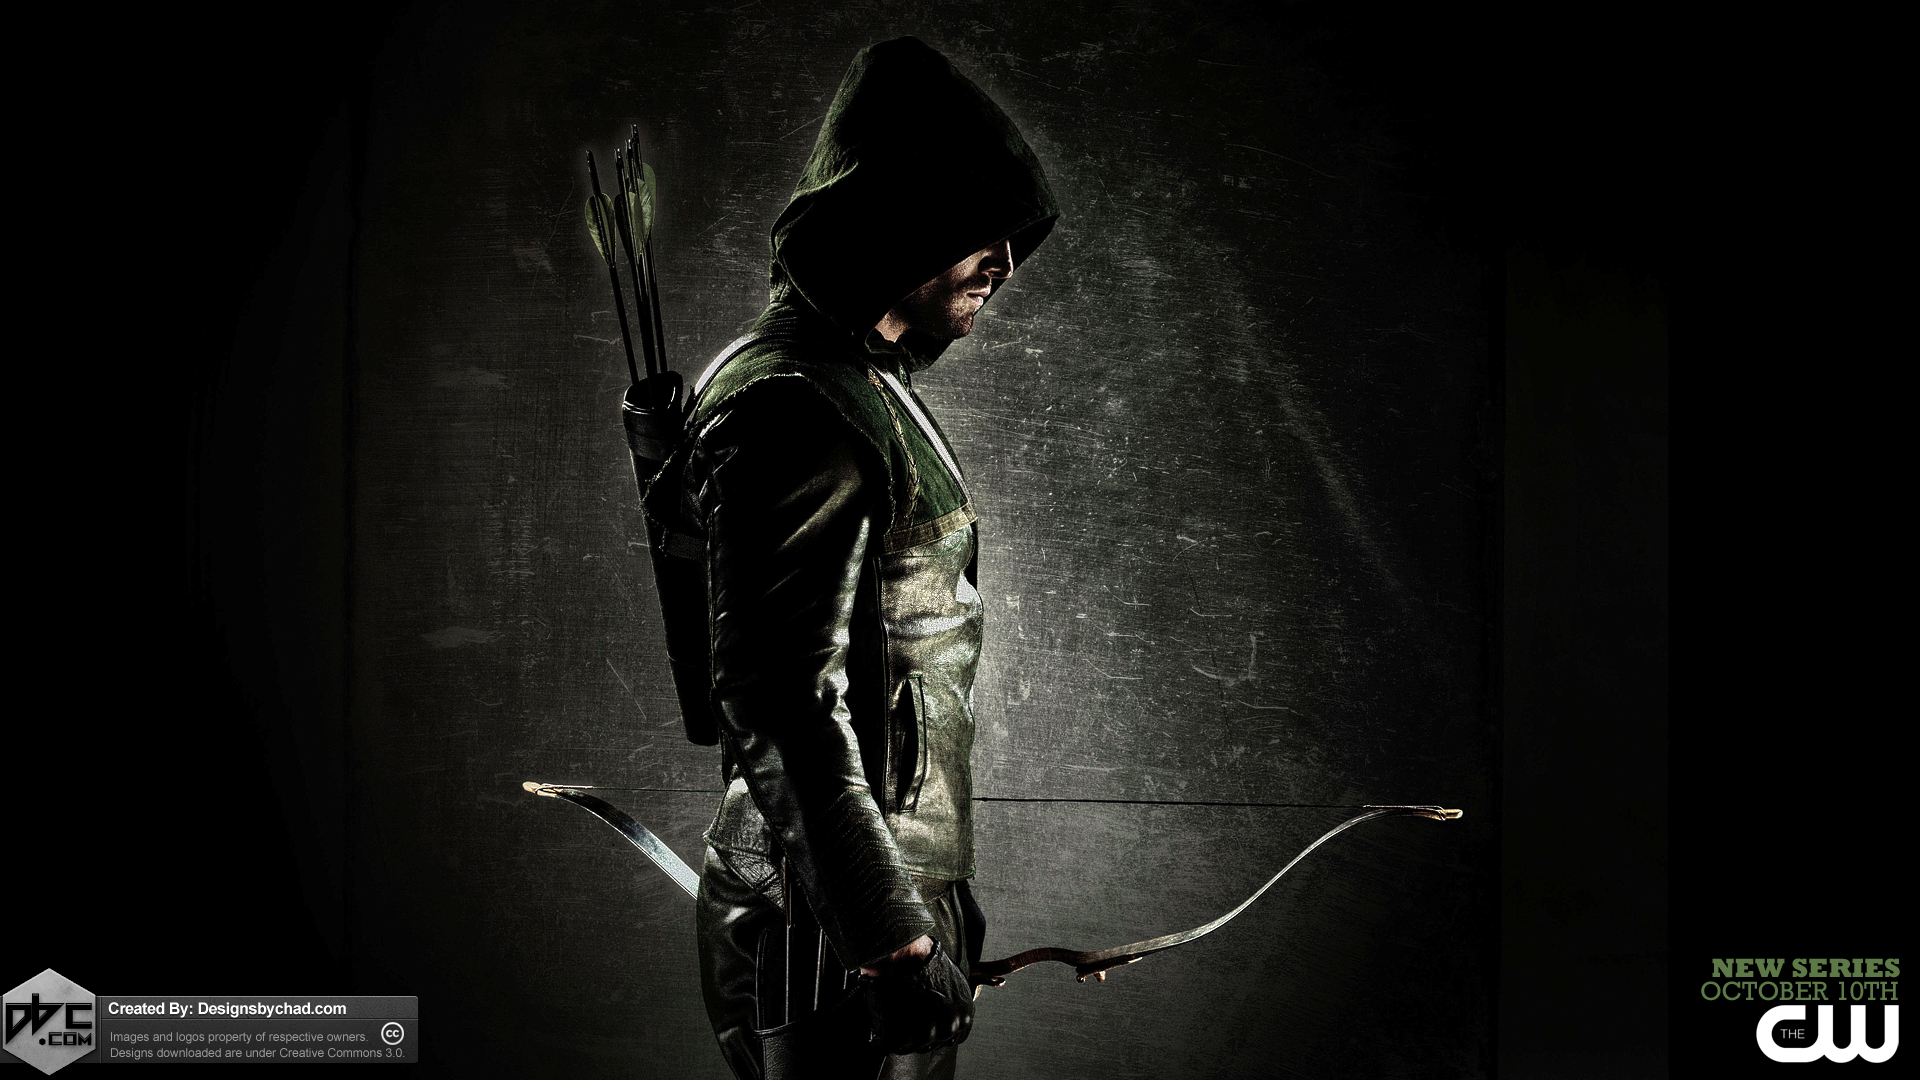 Wallpaper Other HD For The Cw S New Series Arrow Load All